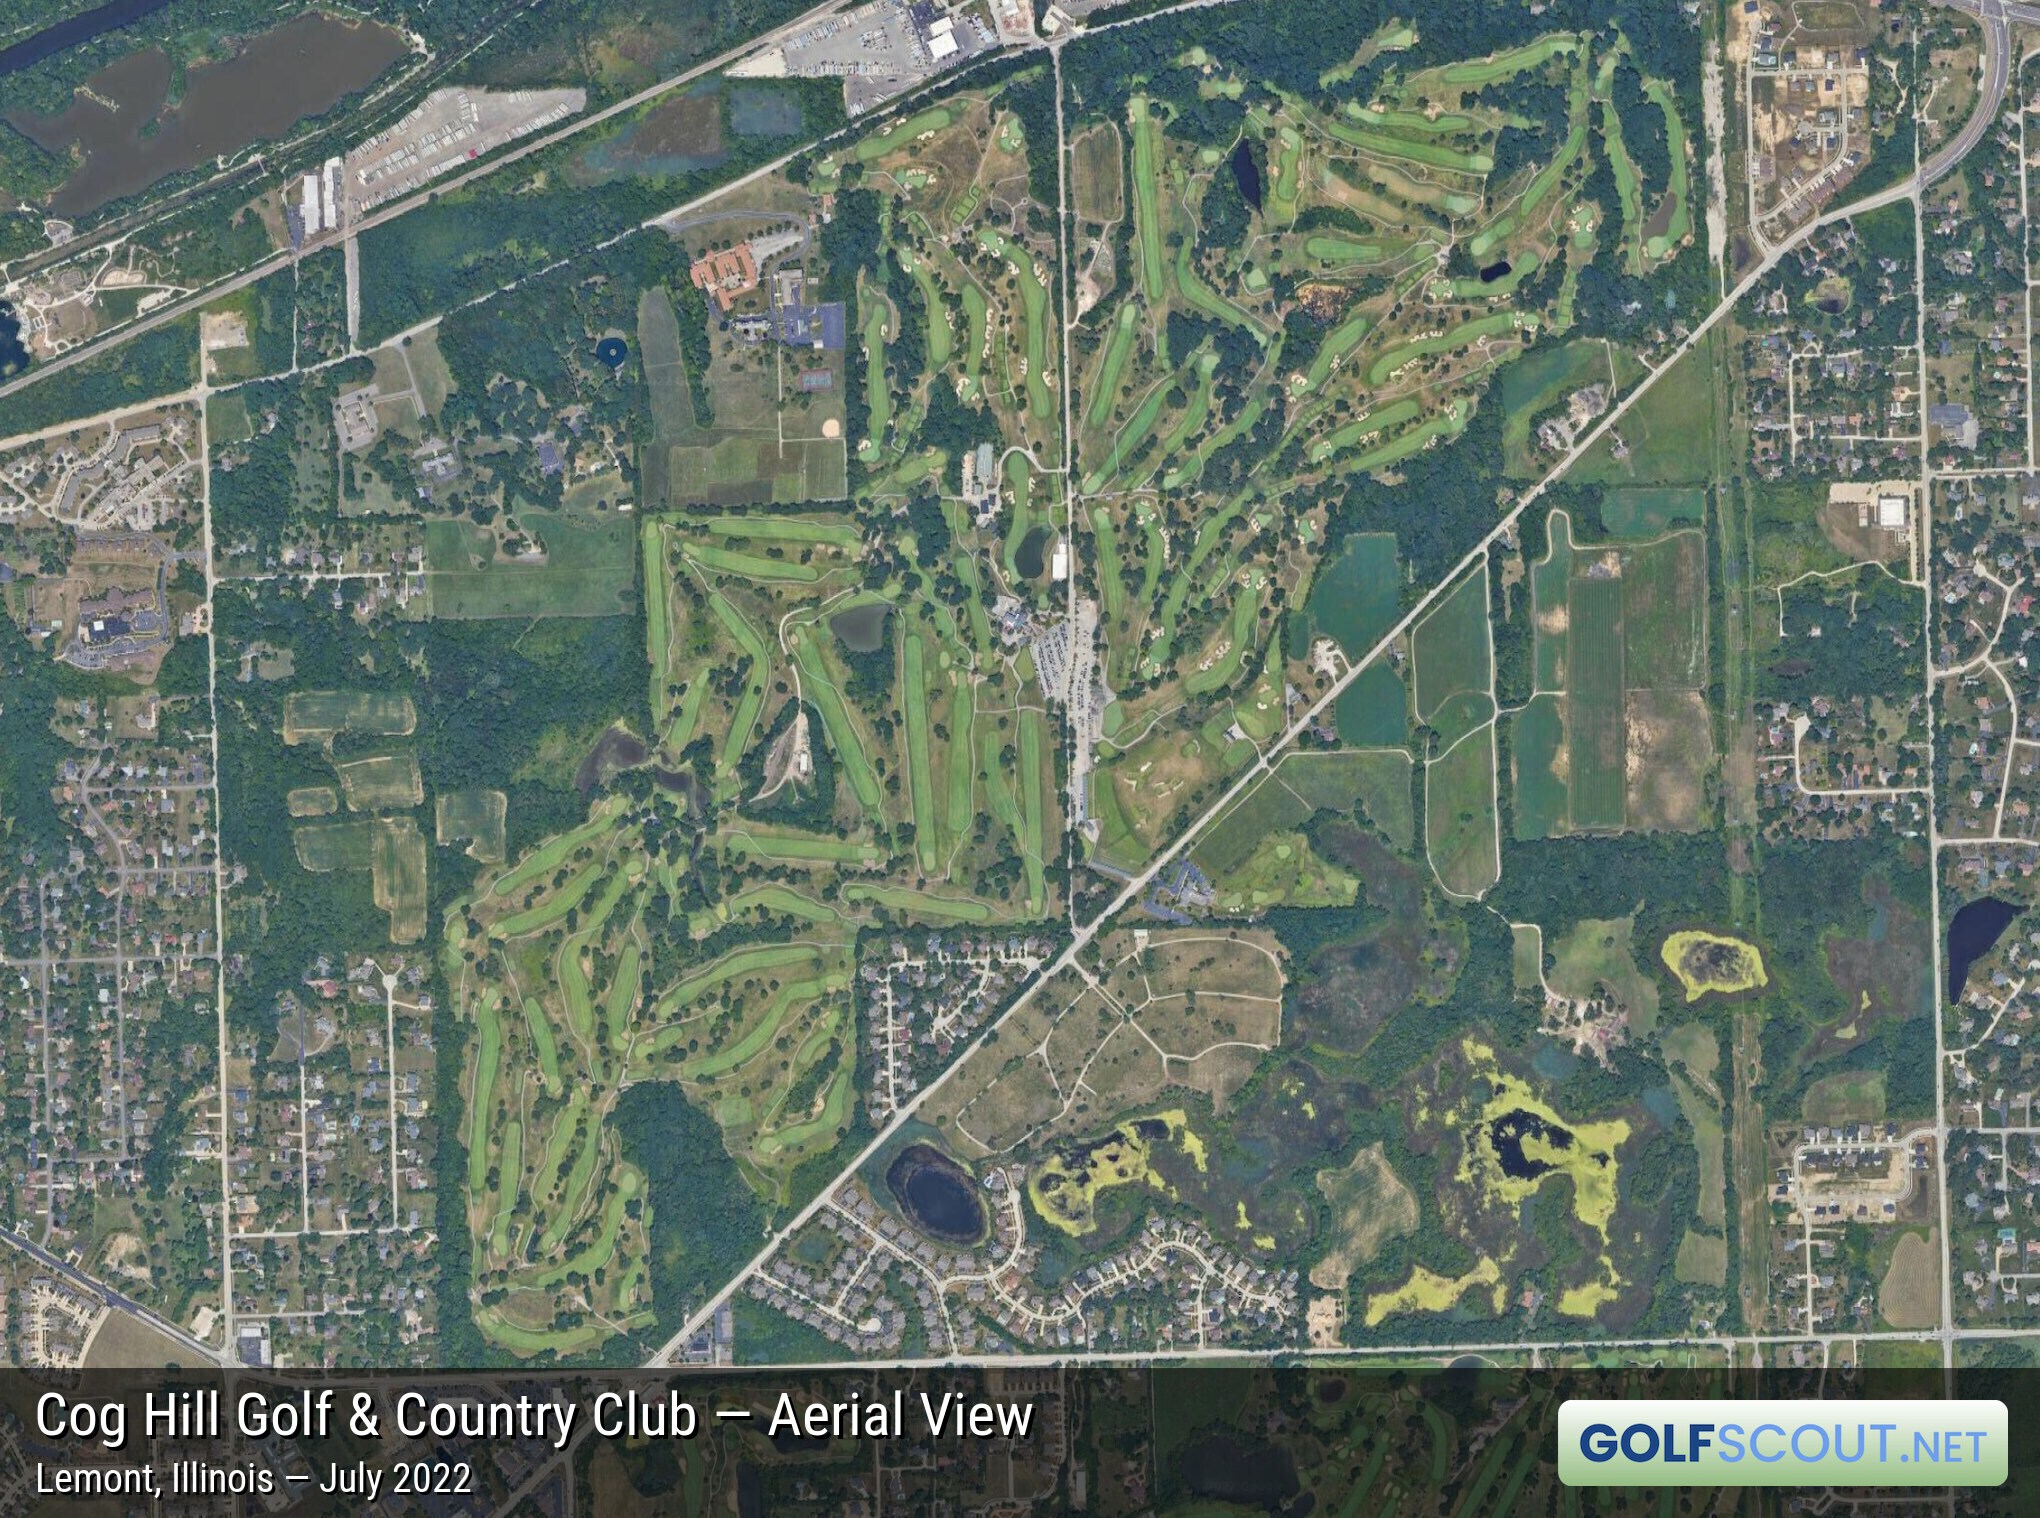 Aerial satellite imagery of Cog Hill Course #2 - Ravines in Palos Park, Illinois. Cog Hill has 4 courses. Courses 2 and 4 are located in the northeast portion of the property. Image courtesy of Google Maps.